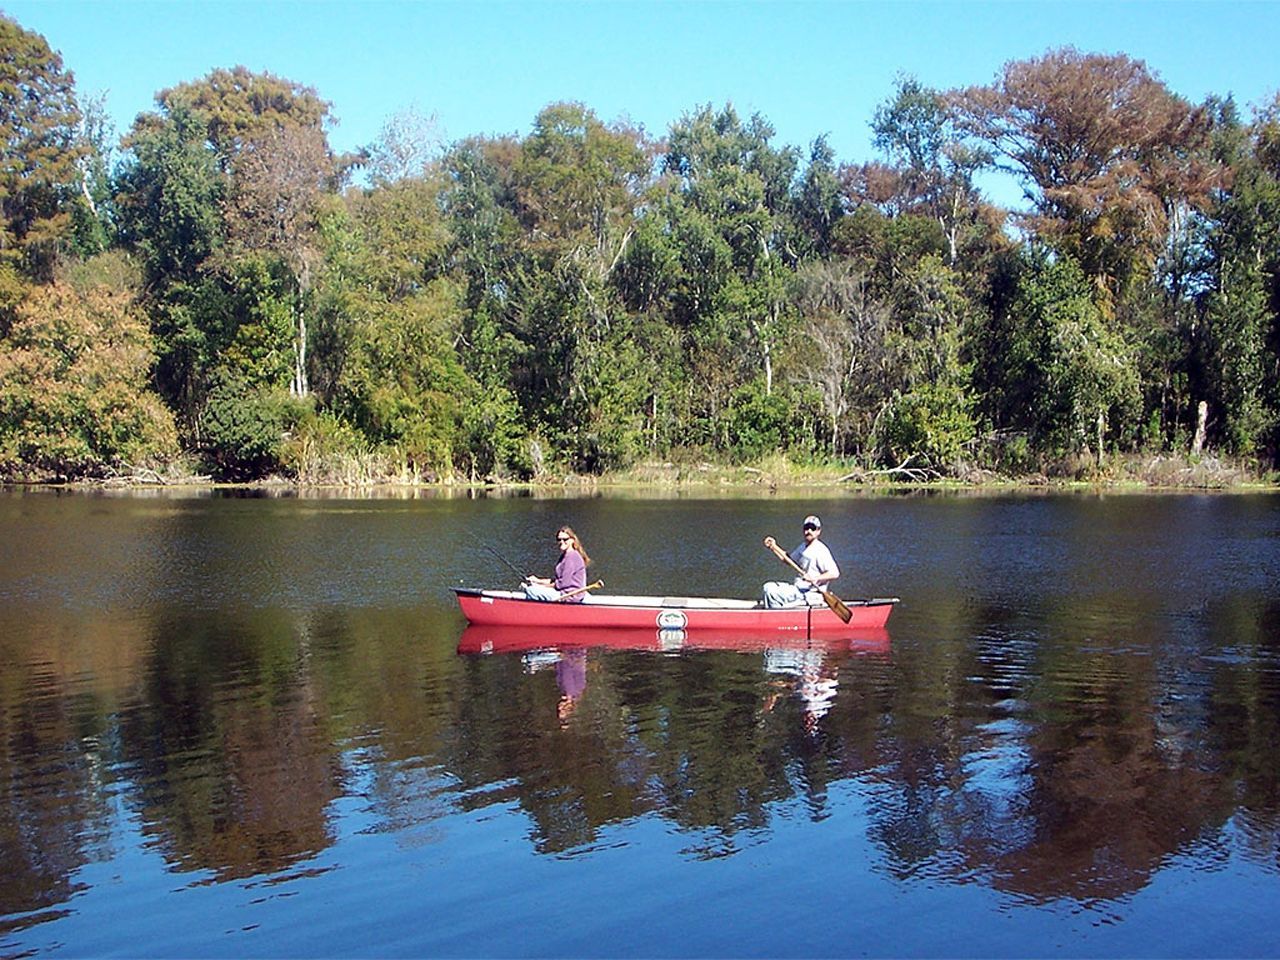 two people in a red canoe on a lake